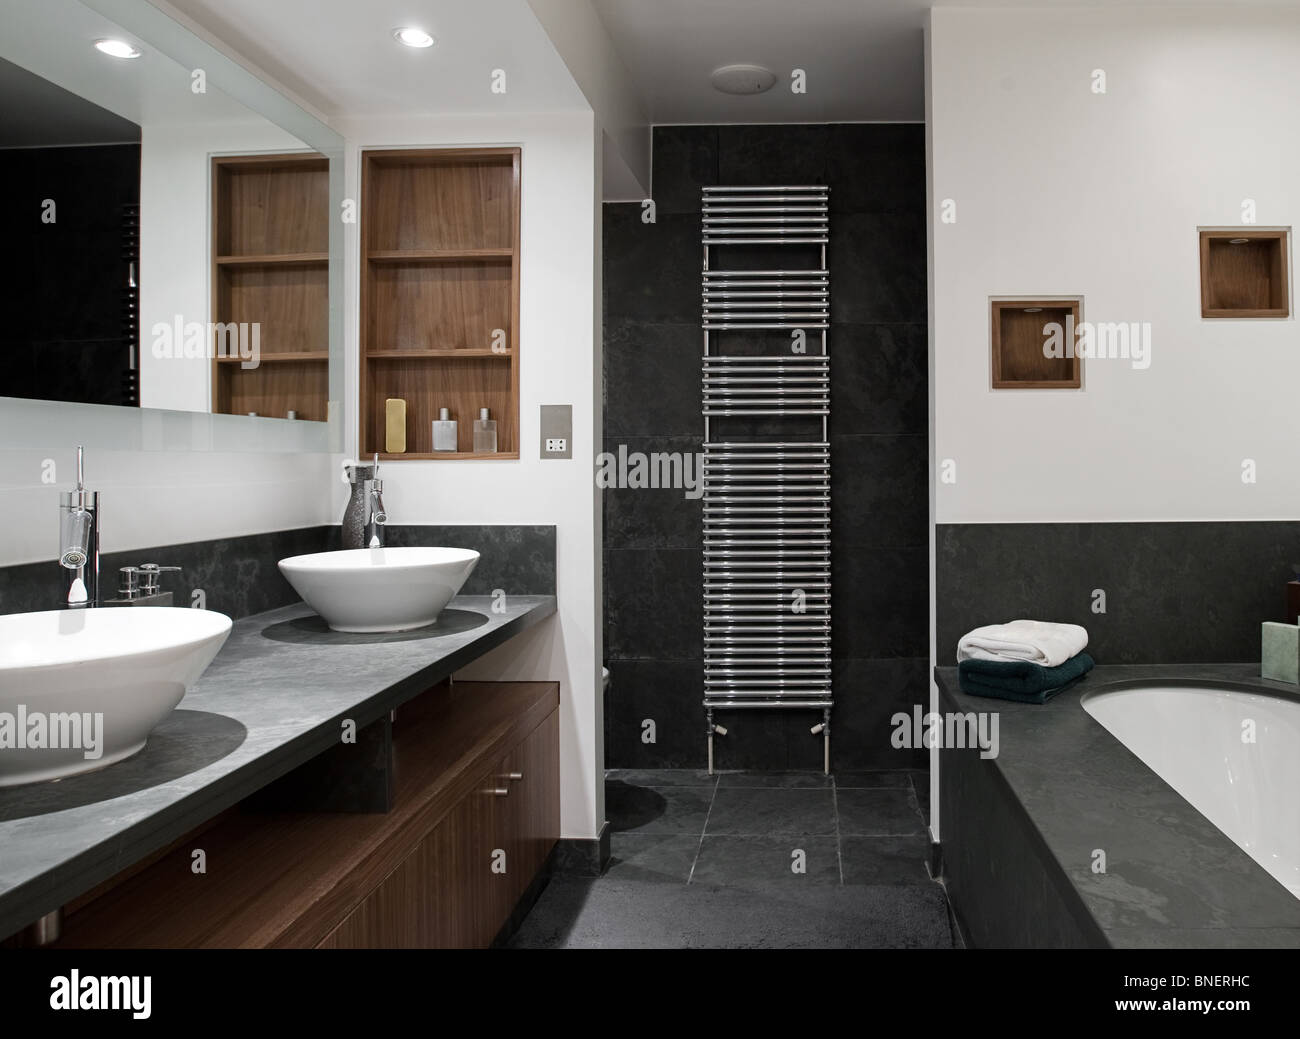 Interior Shot of a Luxury Bathroom with His and Hers Sinks Stock Photo